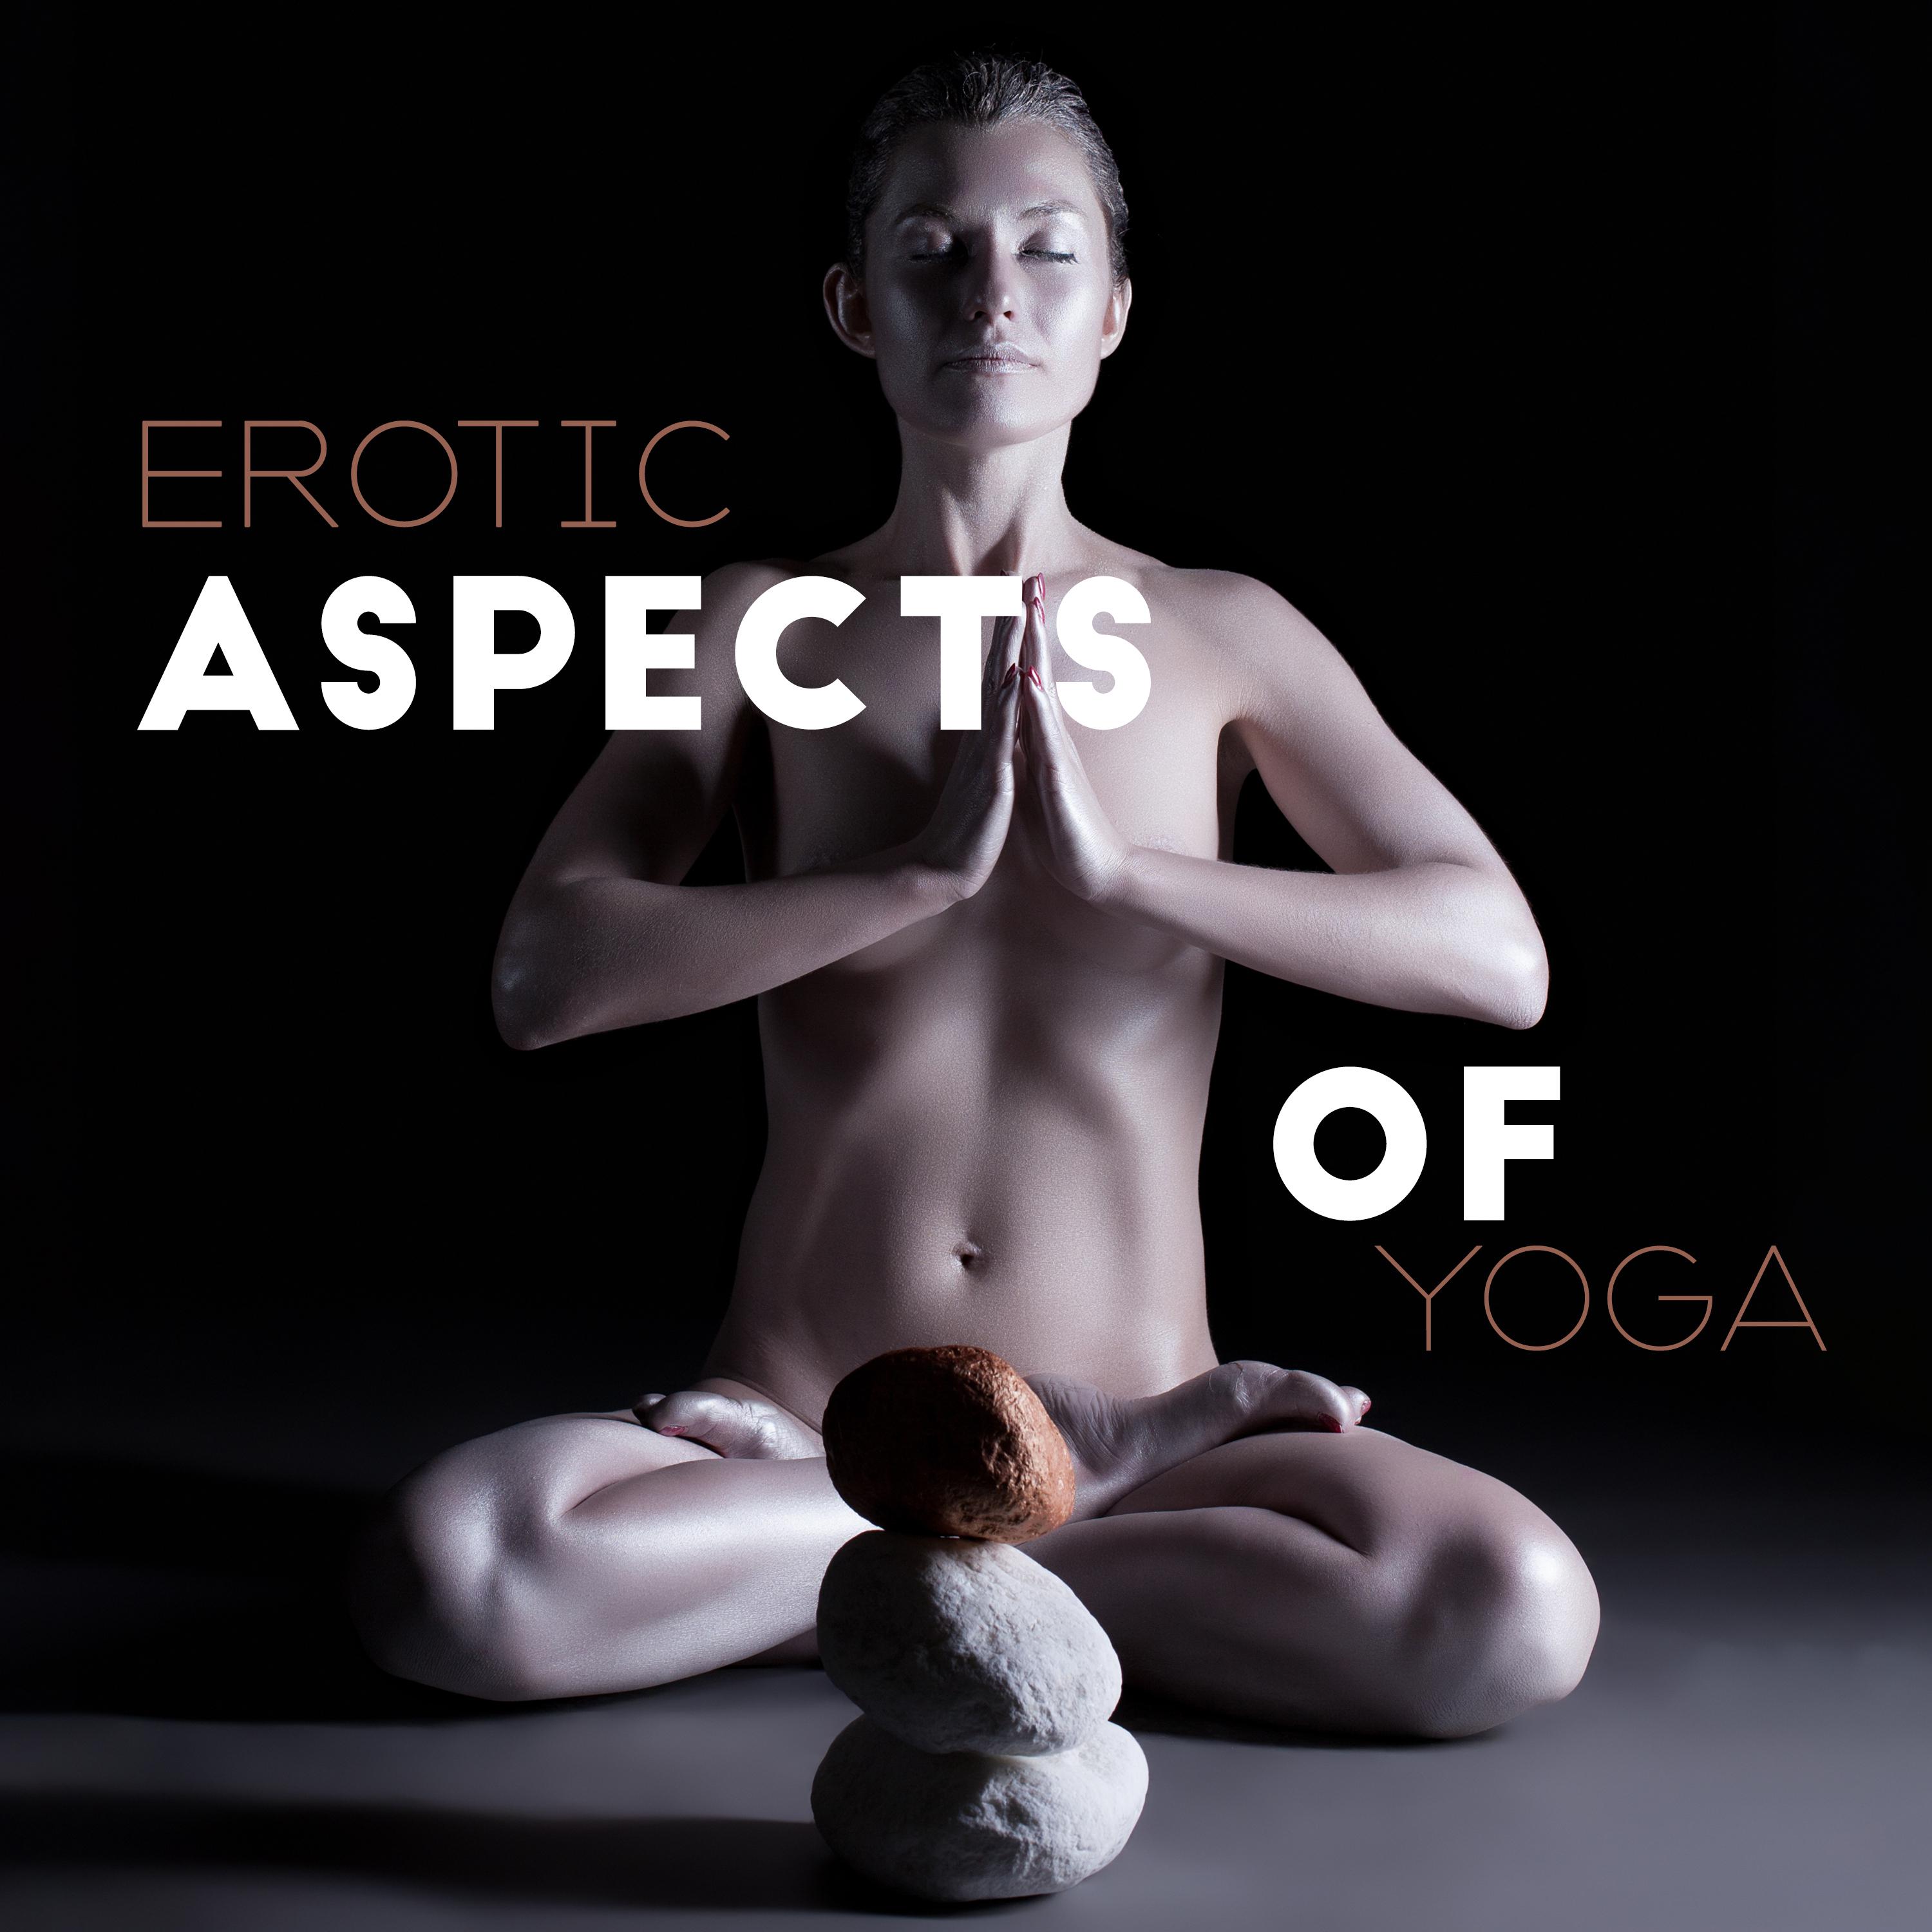 Erotic Aspects of Yoga - Balance Metaphysical, Body Connection in Sex, Varied Desire, Desire Hot, Strength Feelings